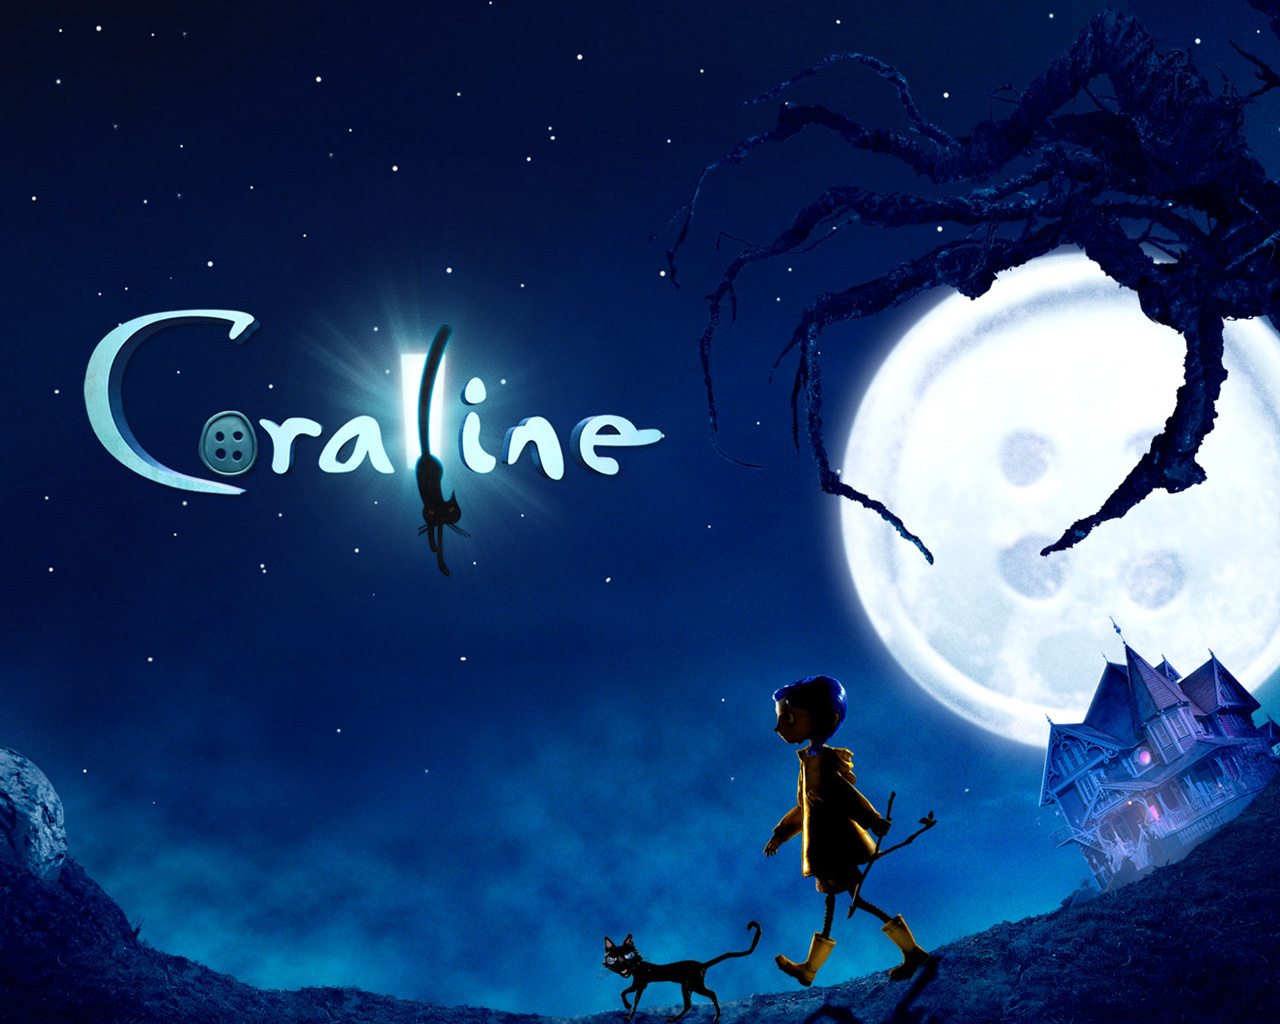 Cartoon Coraline Widescreen Wallpaper And Large Pictures